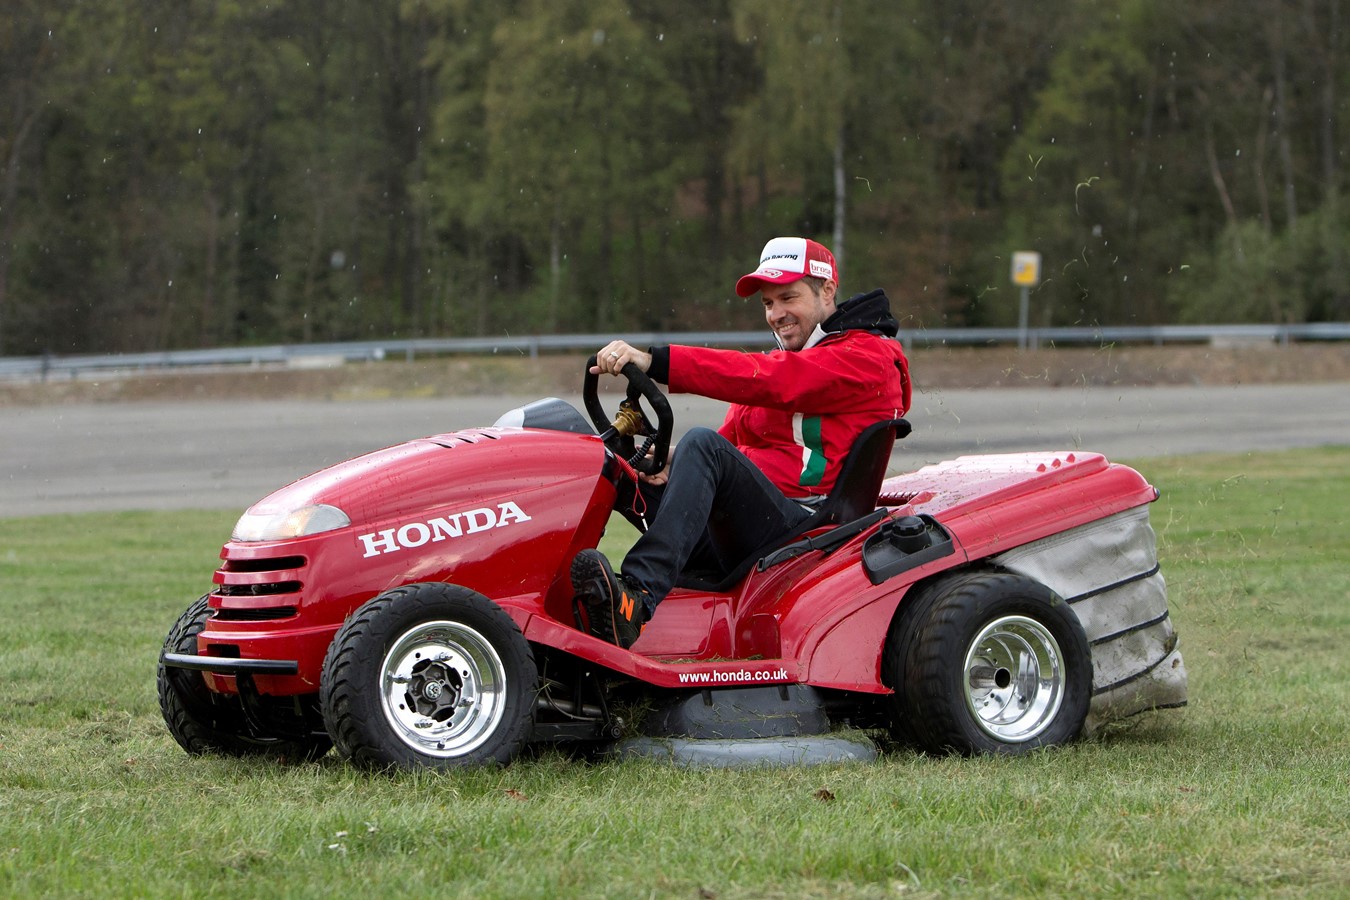 Tiago Monteiro takes on the legendary ‘Eau Rouge’ behind the wheel of the world’s fastest lawnmower – #meanmower